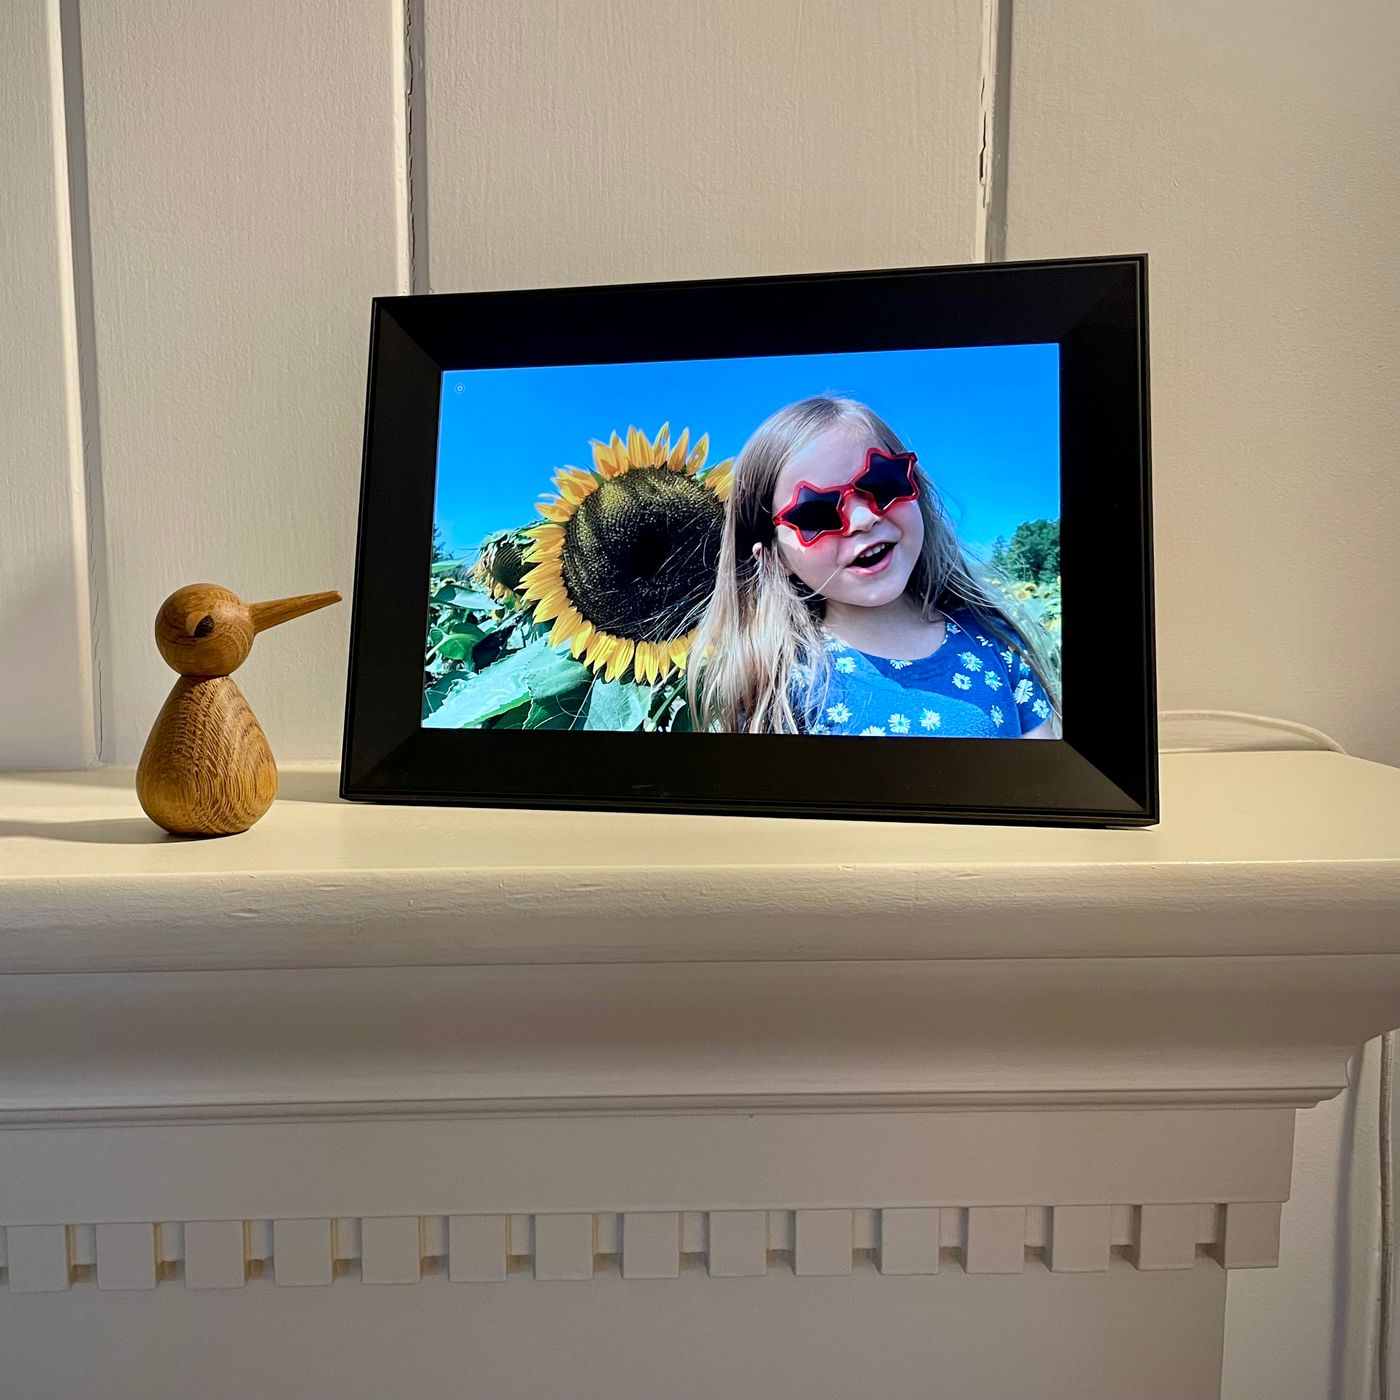 Aura Digital Picture Frame: The Best Thing I Bought in 2021